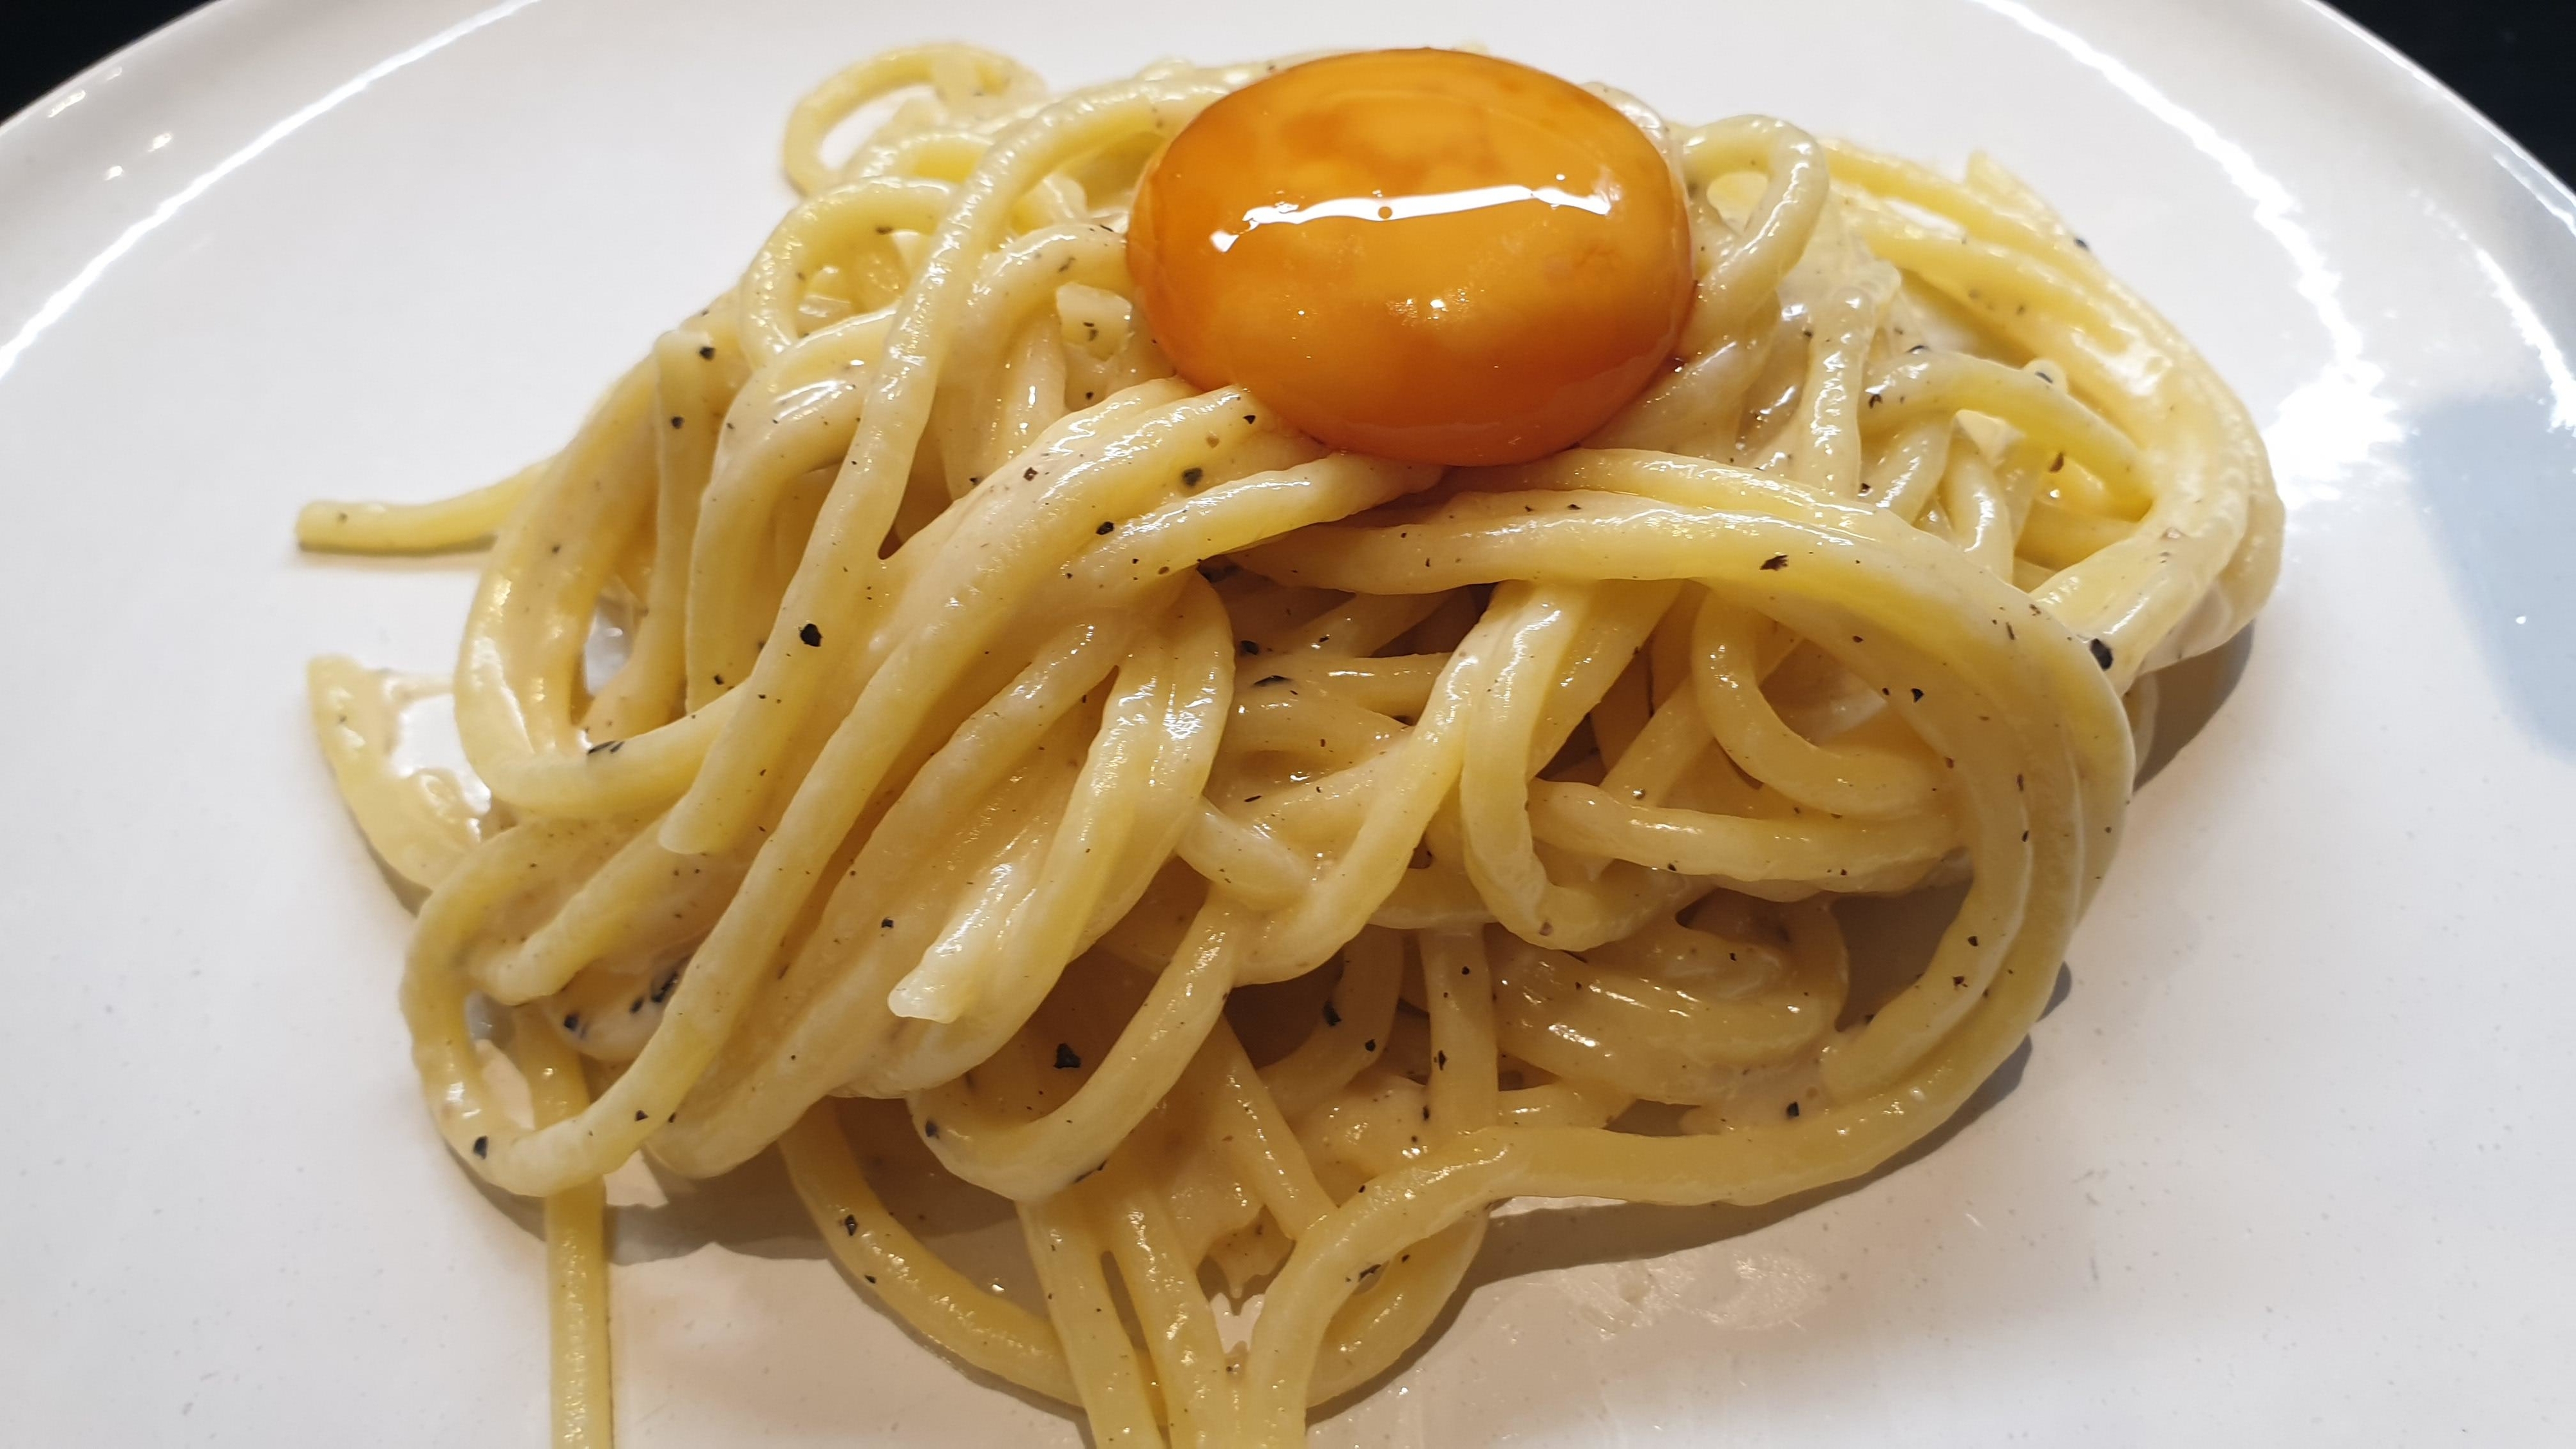 Plate of spaghetti topped with an egg yolk